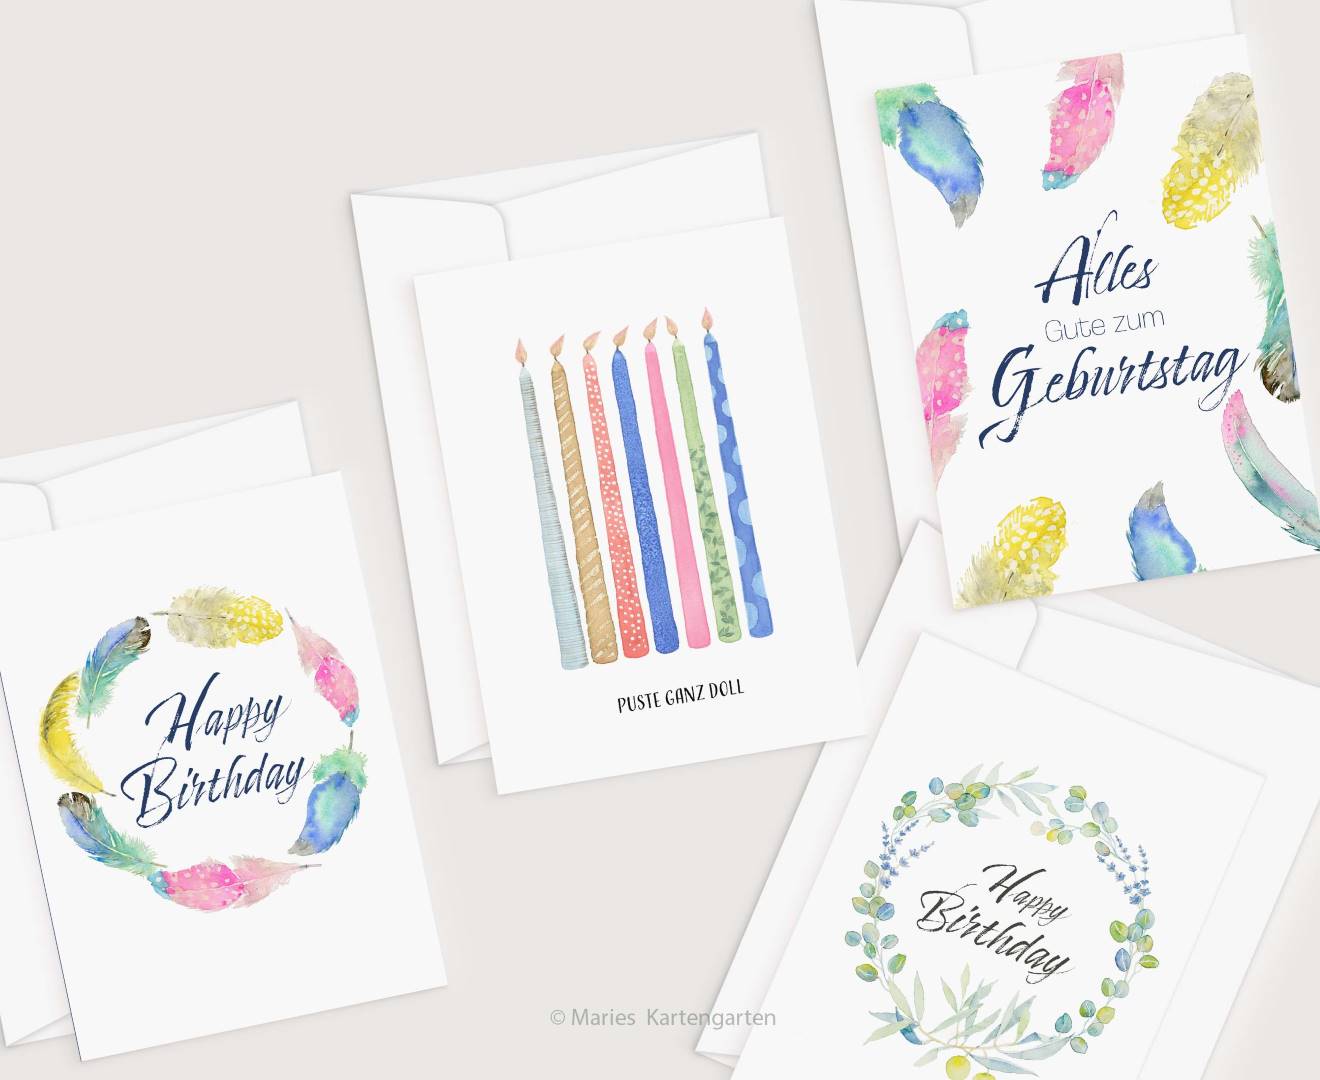 four birthday cards with watercolor feathers on them